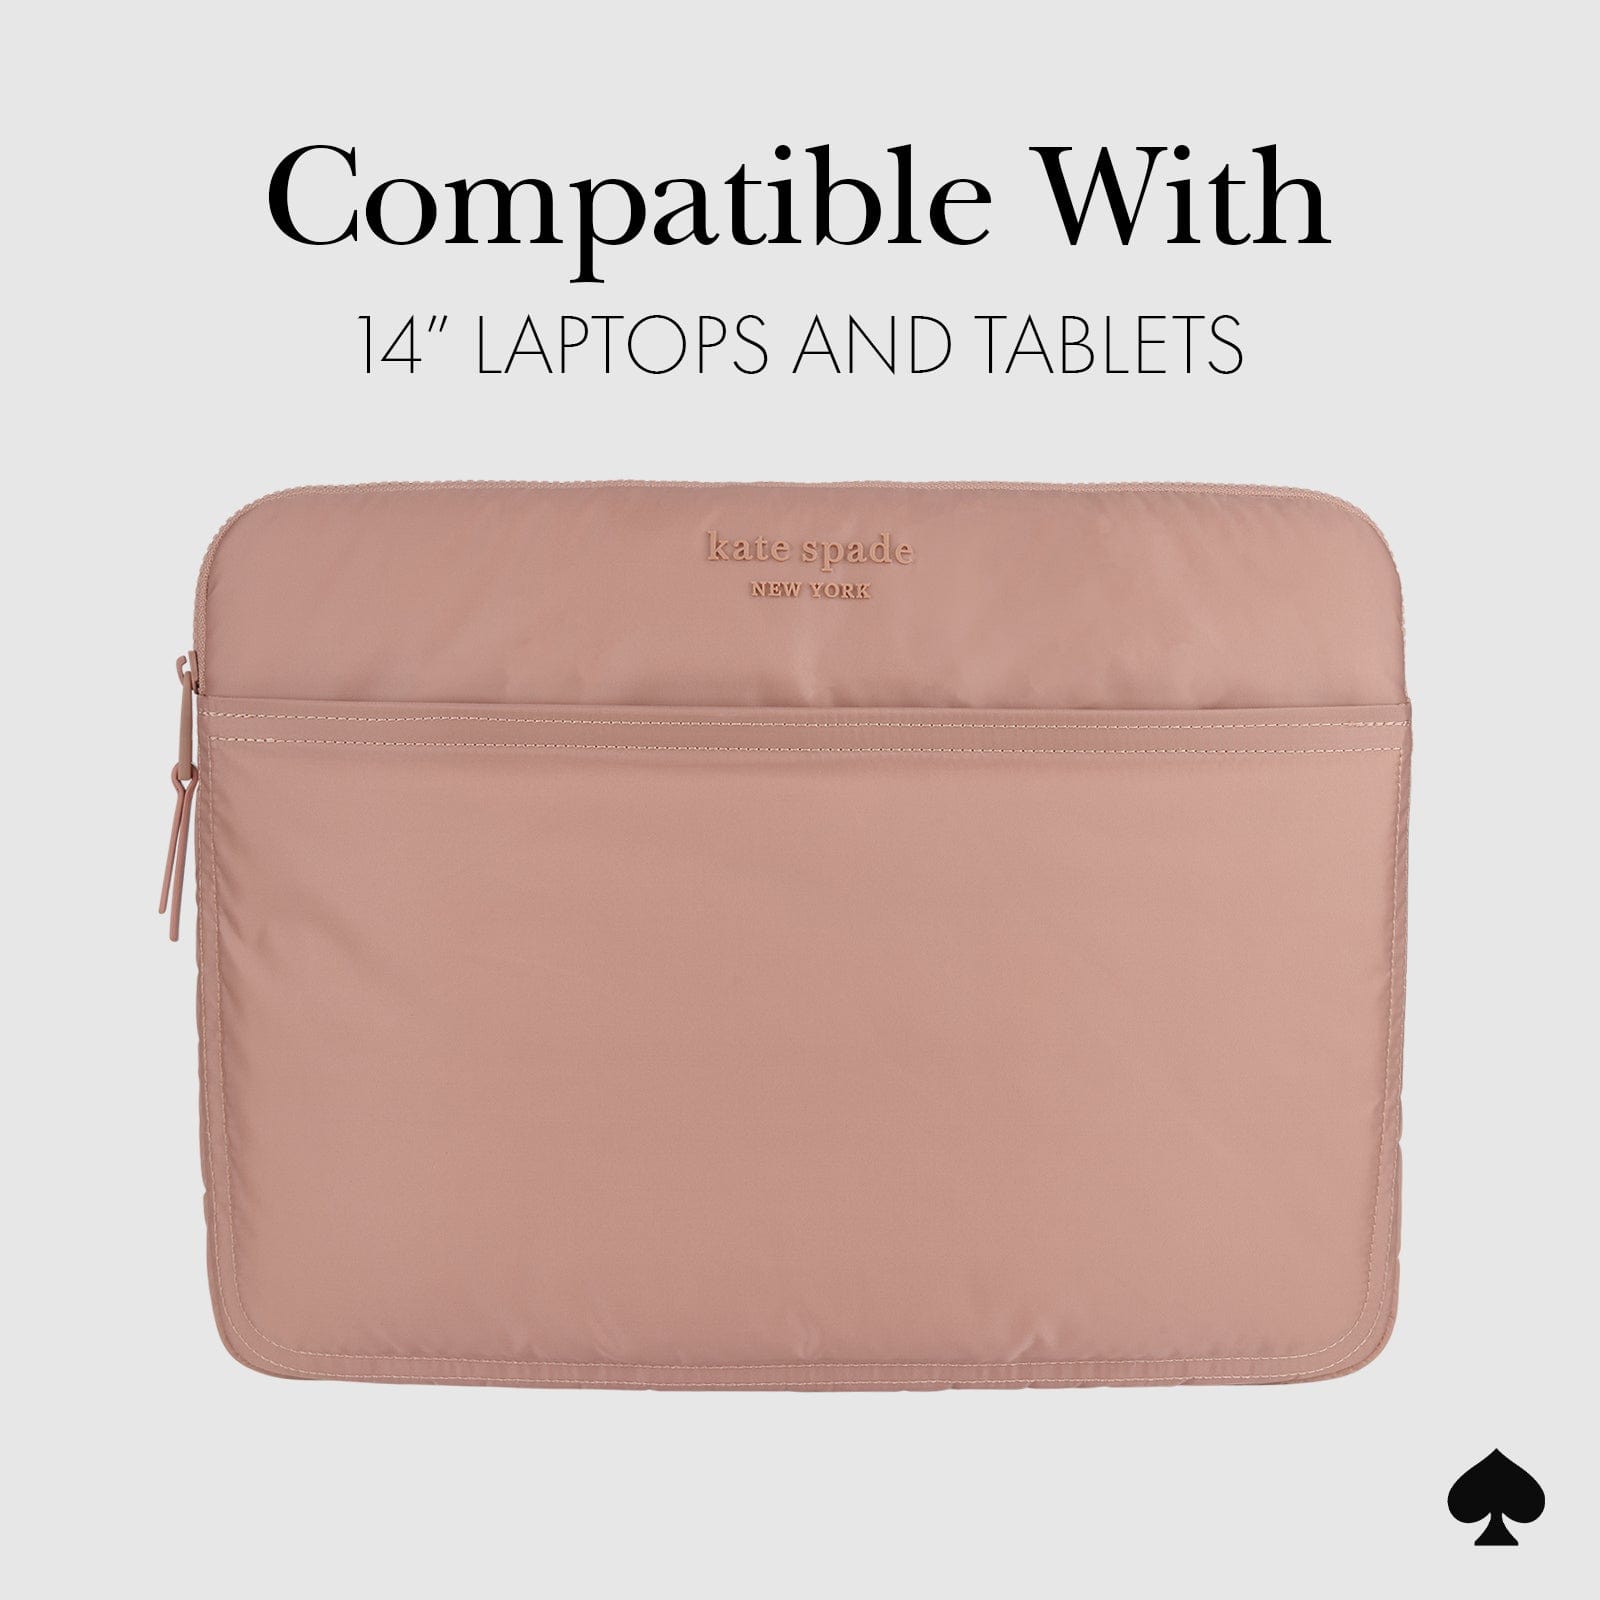 COMPATIBLE WITH 14" LAPTOPS AND TABLETS